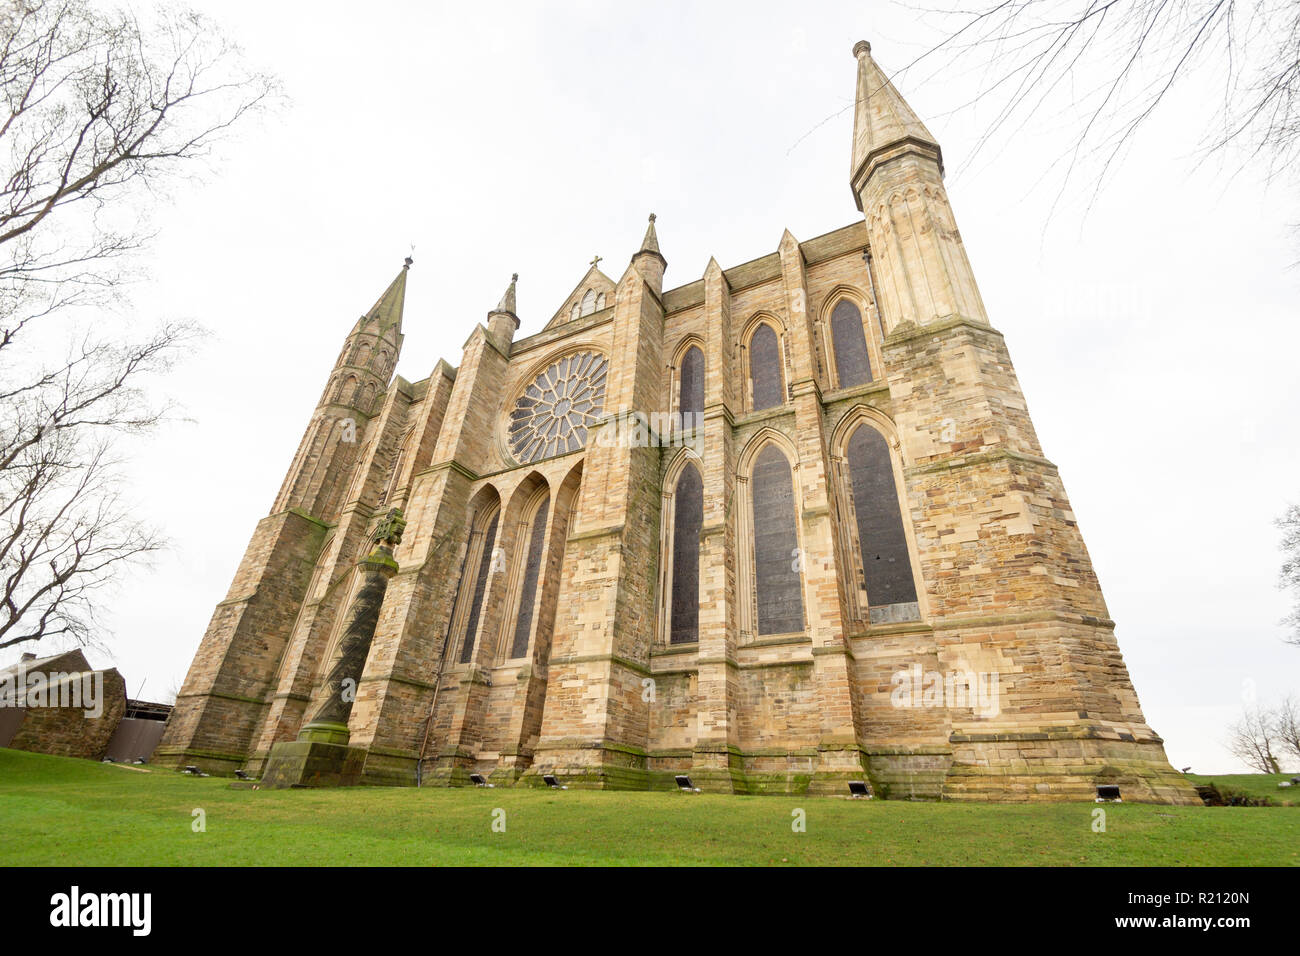 Durham/England - January 5th 2013: Wide angle photo of Durham cathedral Stock Photo